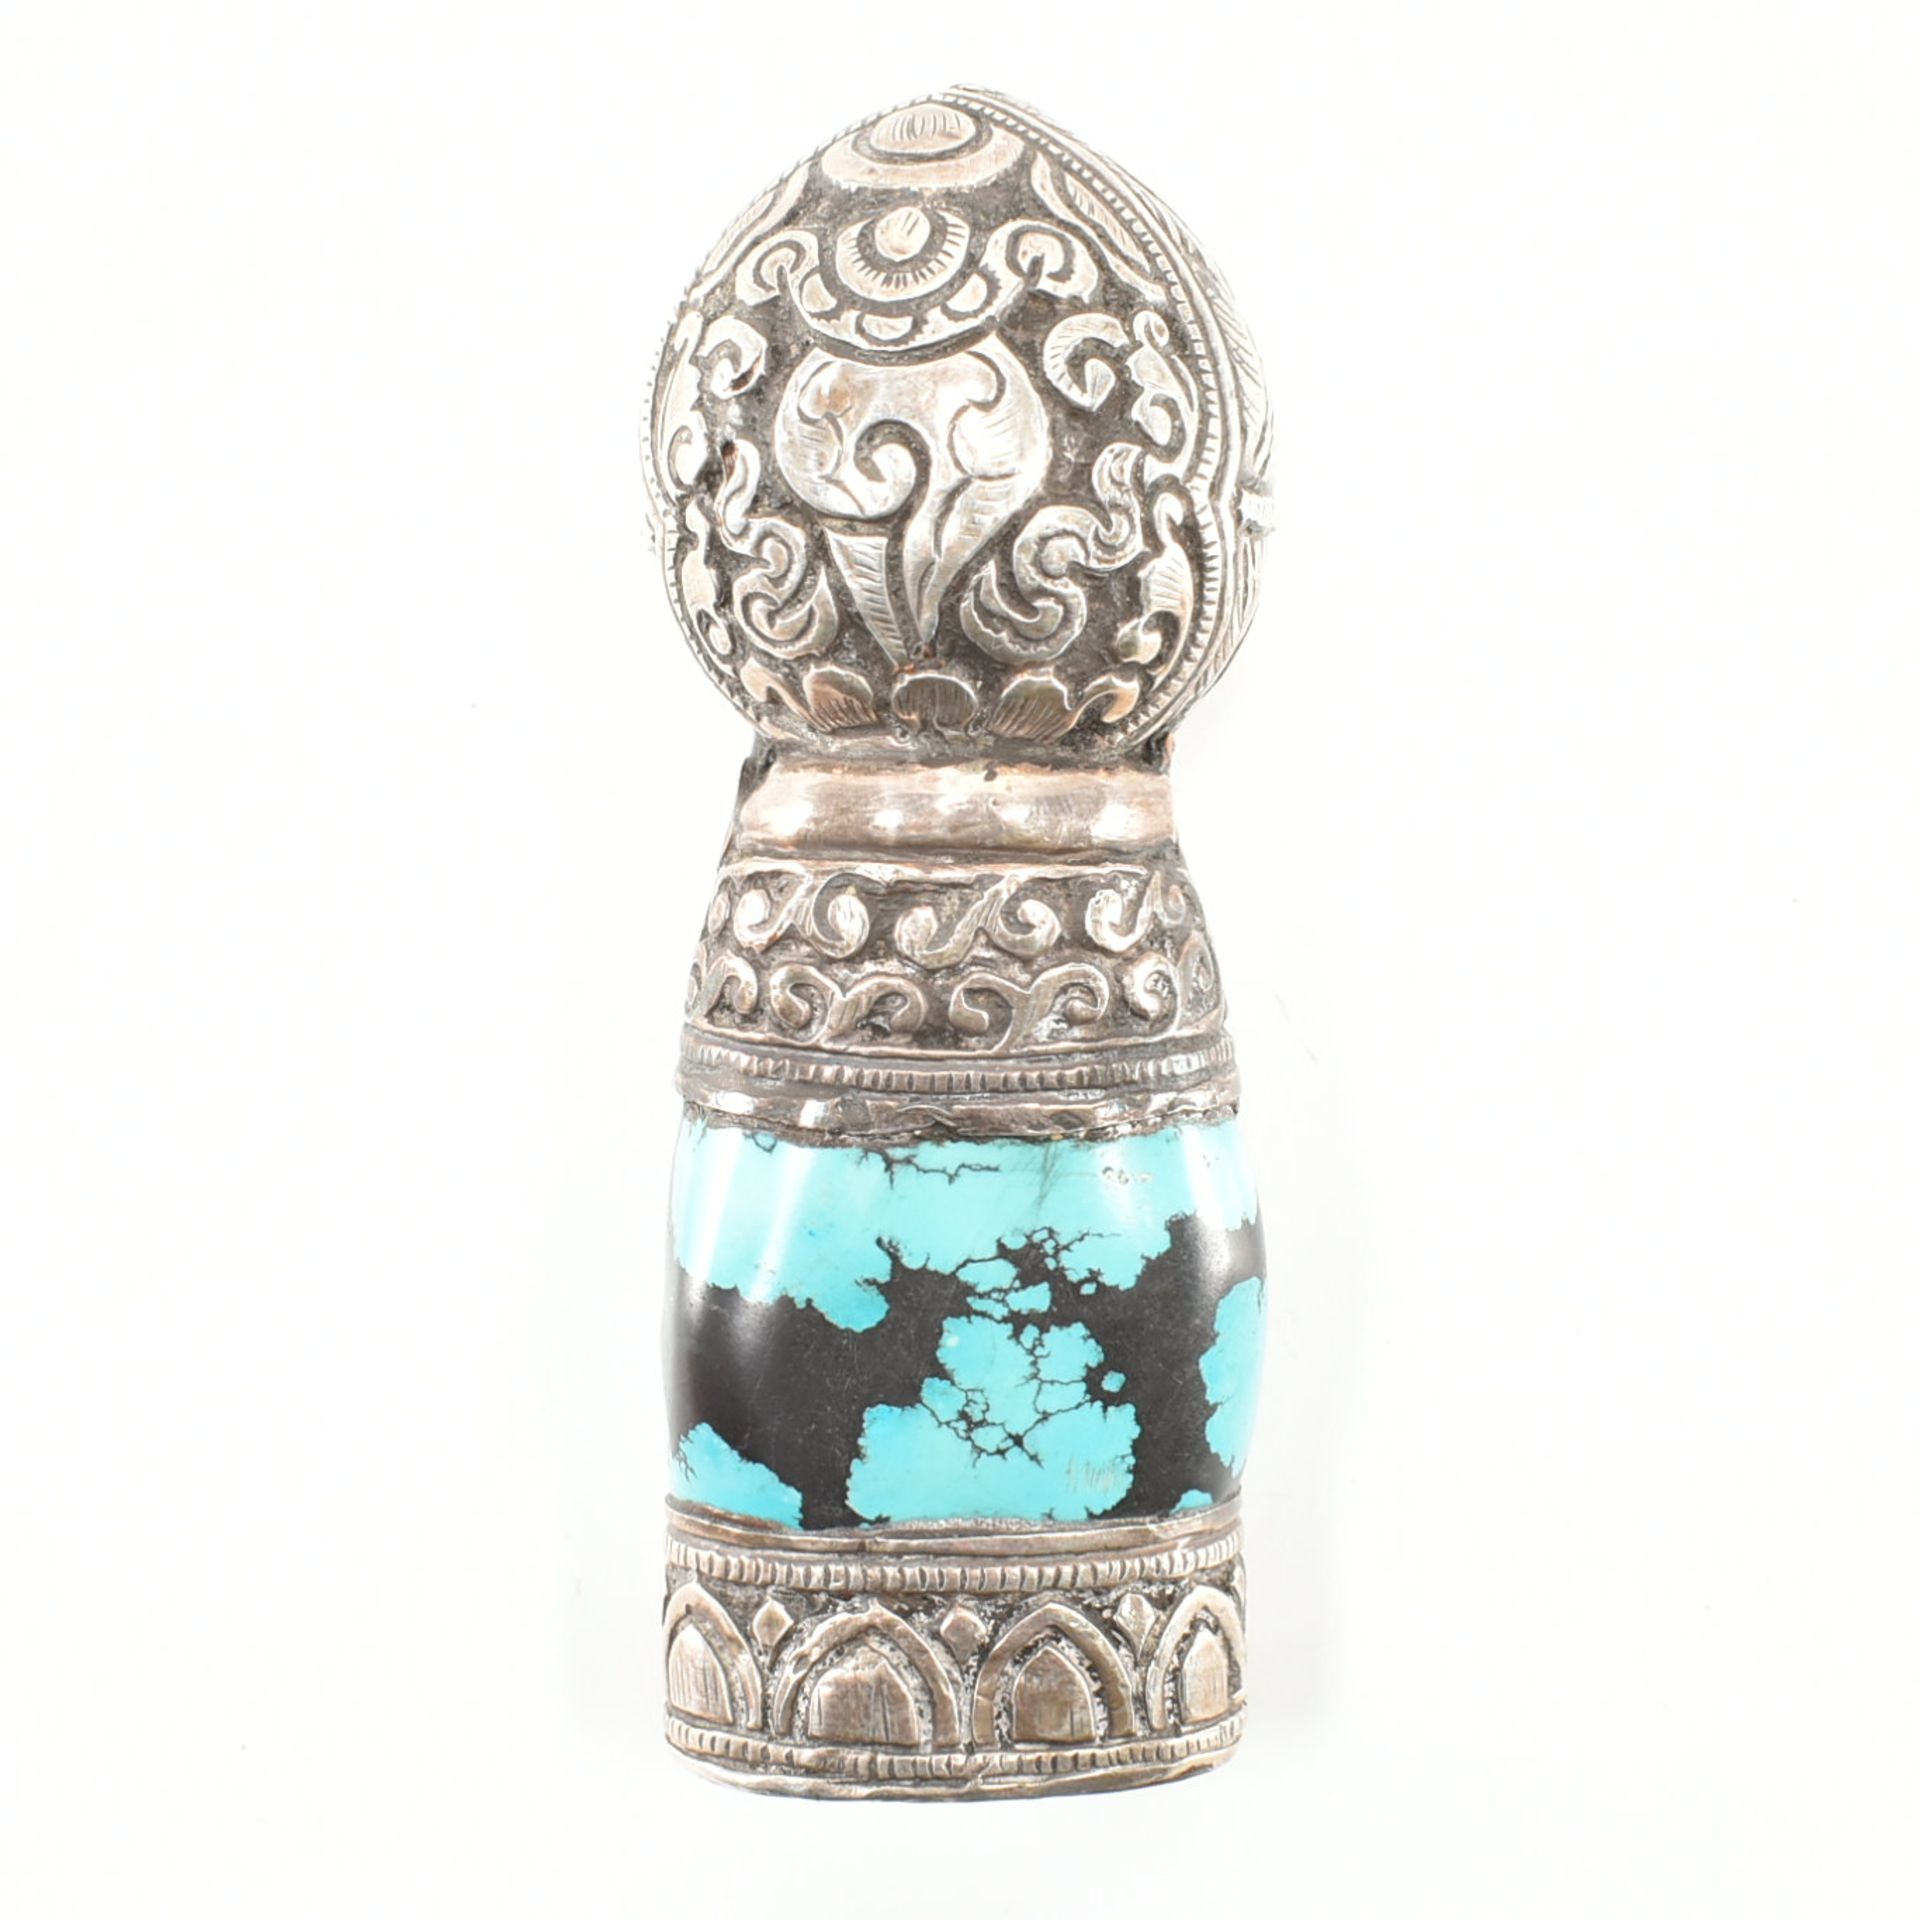 TIBETAN SILVER & TURQUOISE PERSONAL SEAL - Image 4 of 7